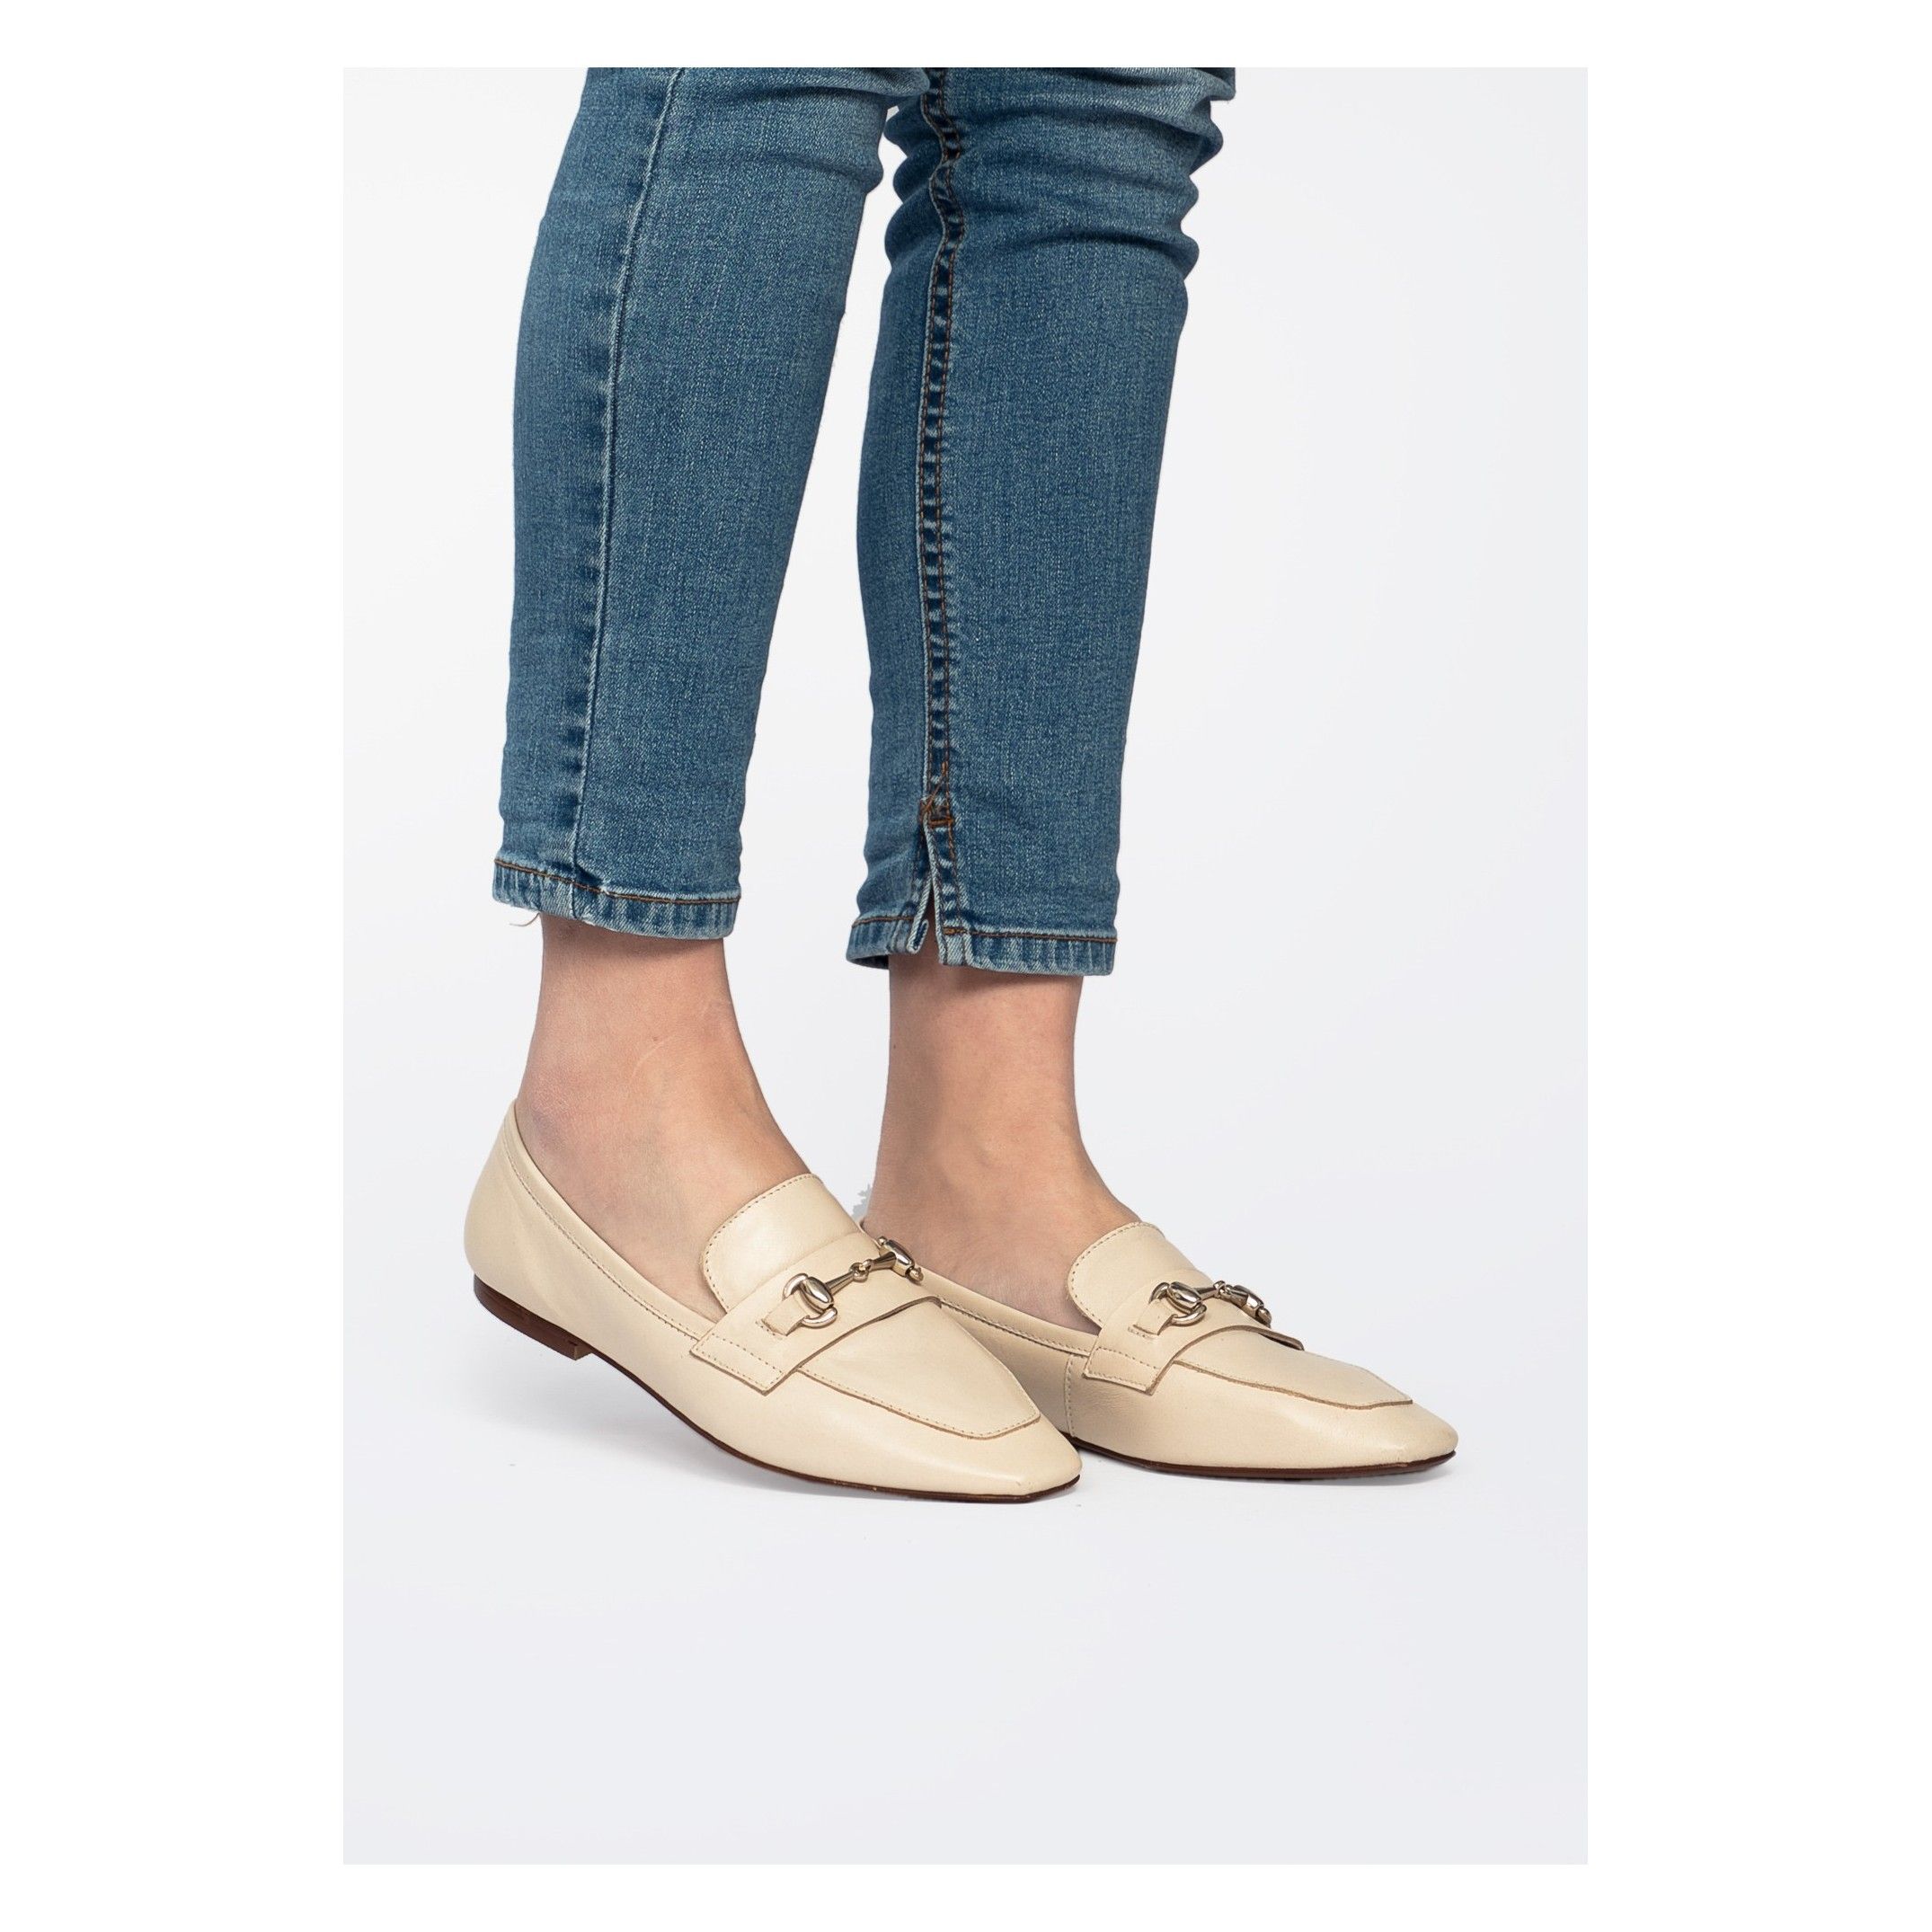 Flat moccasins for women, by Eva López Shoes. Exterior material: leatherette. Open shoe. Inner lining and insole: Breathable, anti-allergic microfiber and keeps the inside of the footwear dry. Sole material: Cuerolite. Heel height 1 cm. Designed and manufactured in Spain.